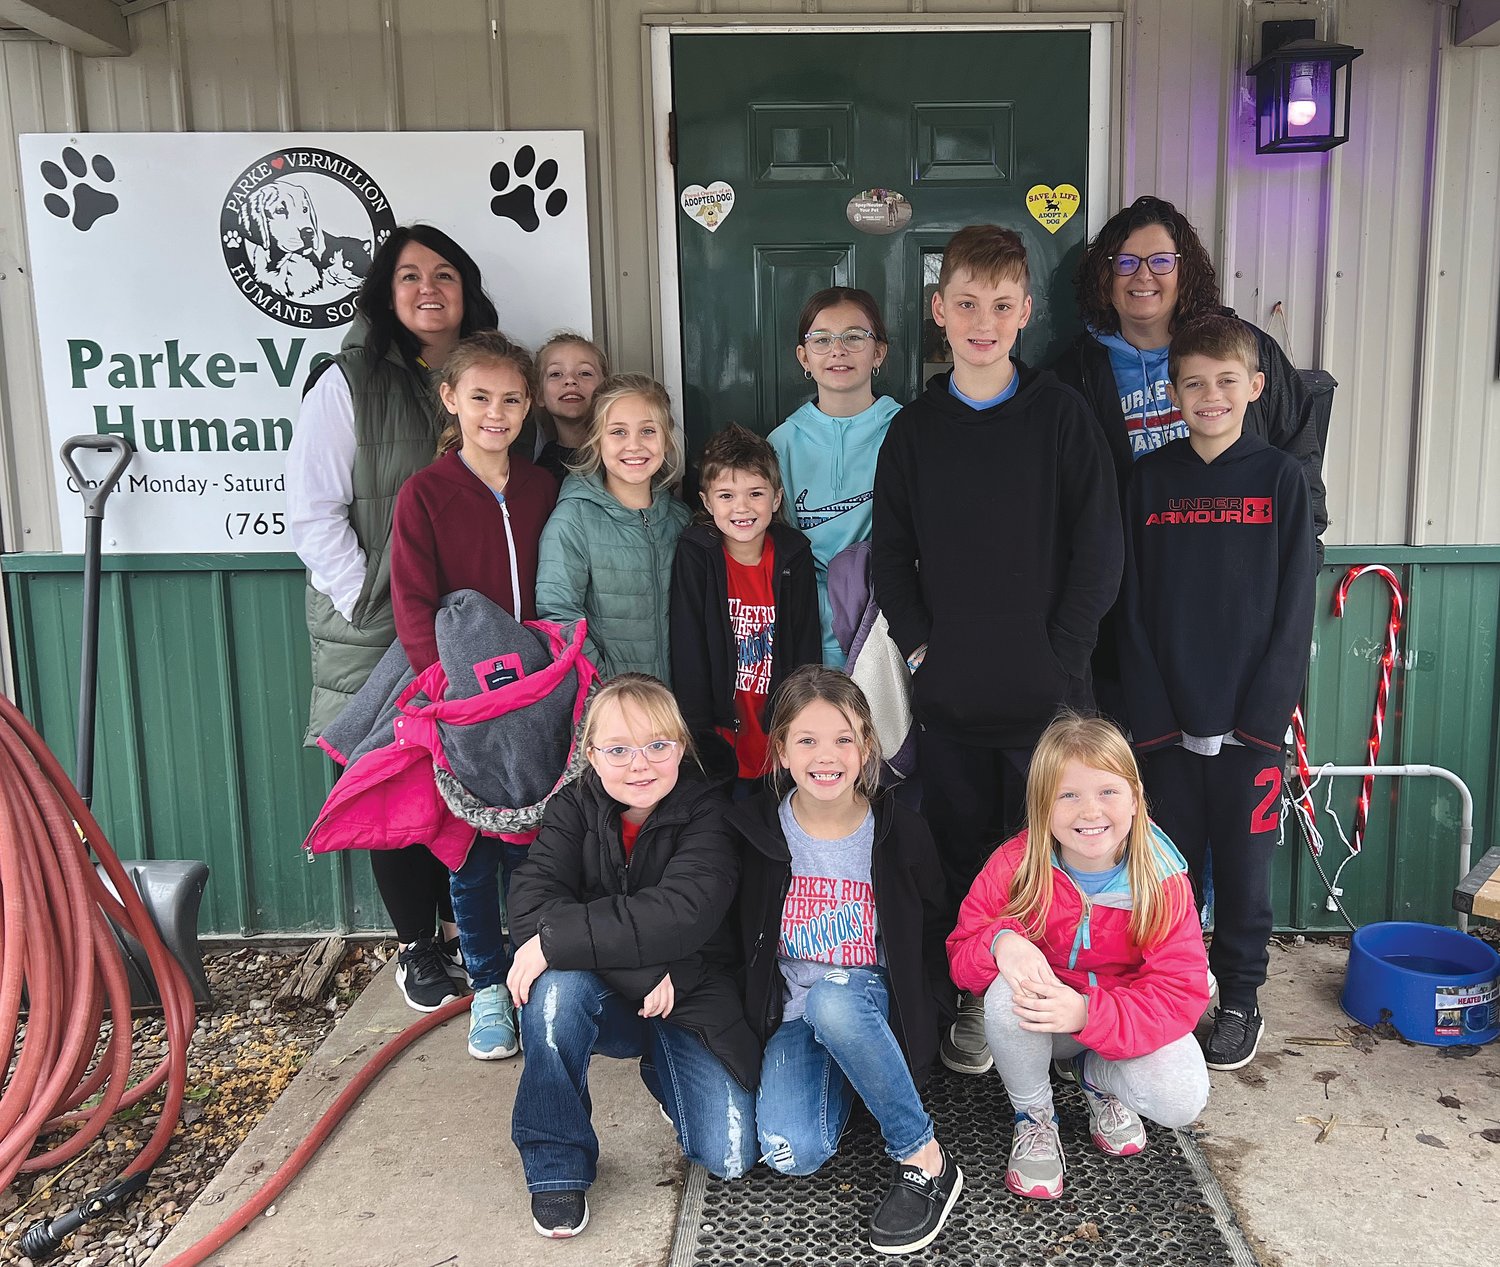 Members of the Turkey Run Elementary Student Lighthouse Team recently held a PAW-ty in honor of Finley’s birthday. Finley is the school’s service dog. TRES students and staff donated items such as pet food, treats and toys, cat litter, paper towels and dish soap. As a part of this activity, members delivered the items to the Parke- Vermillion Co. Humane Society. While there, they were able to visit with the pets. Bethany Tidwell’s class donated the most items. There were 245 items collected. The first grade students enjoyed having Finley spend some in their classroom as a thank you for their donations. Pictured are front row, Savanna York, Rebel Roemer and Javelin Wallace; middle row, Taylor Snell, Abby Hill, Havik Roemer, Luke Mauntel and Jaxson Woods; and back row, Jill Ferguson, Cobie McCrory, Julia Helderman and Rachael Leach.